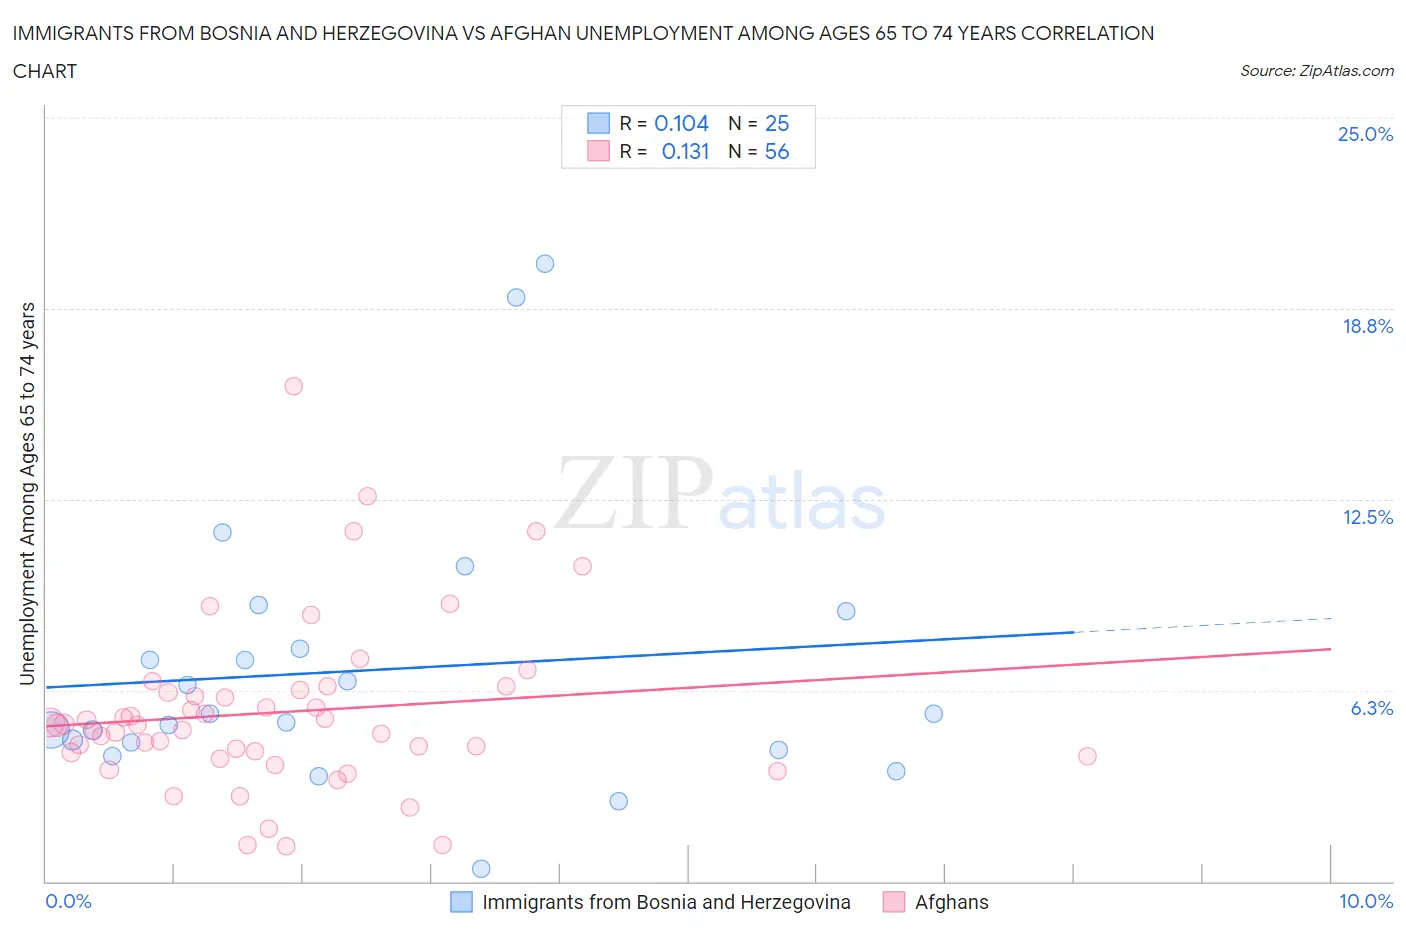 Immigrants from Bosnia and Herzegovina vs Afghan Unemployment Among Ages 65 to 74 years